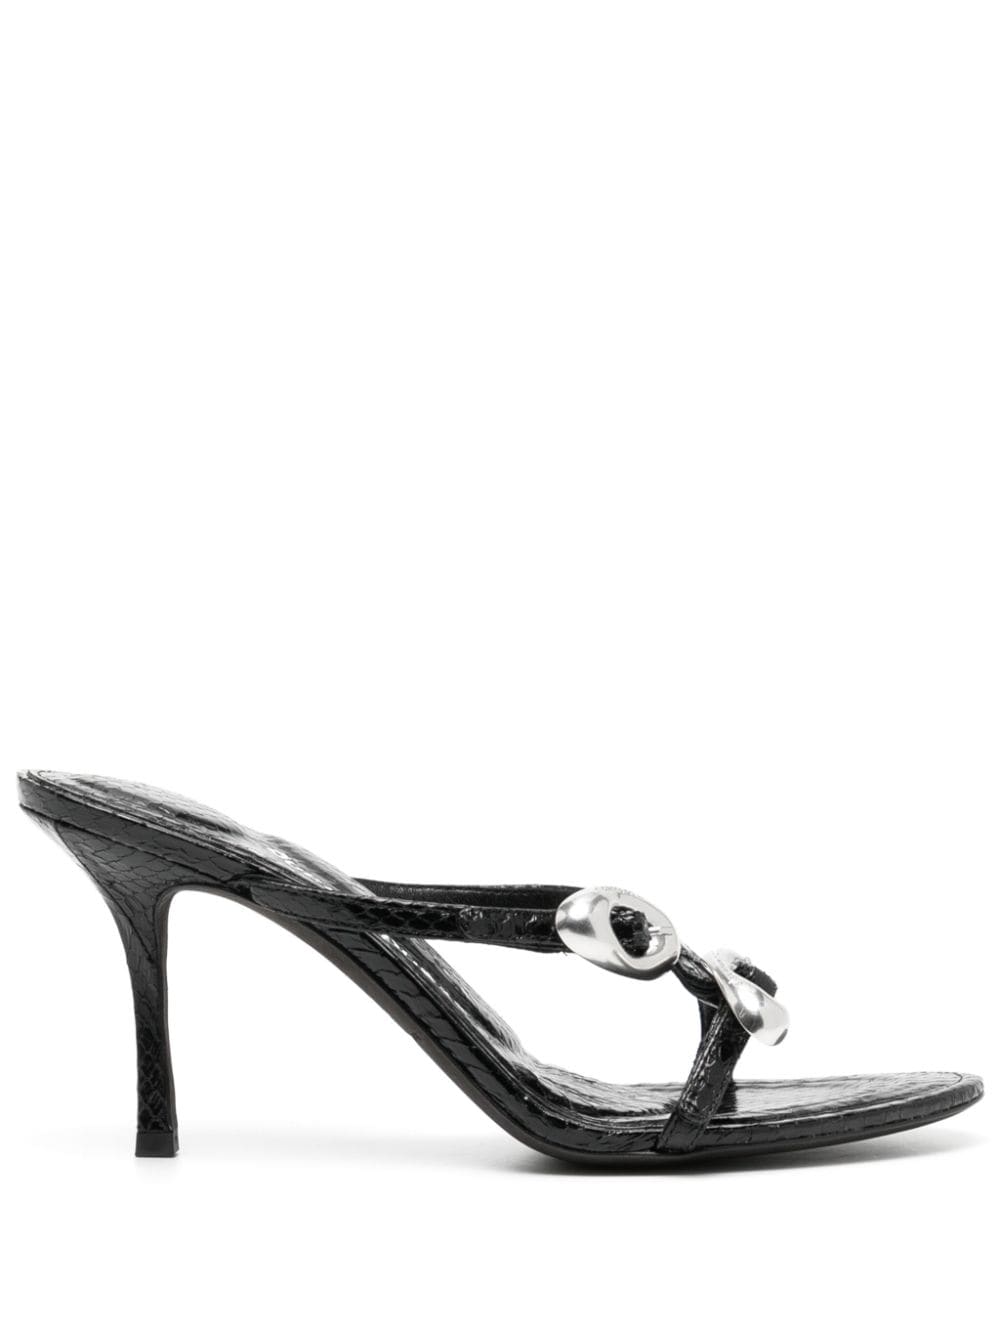 Image 1 of Alexander Wang Dome 85mm slip-on sandals